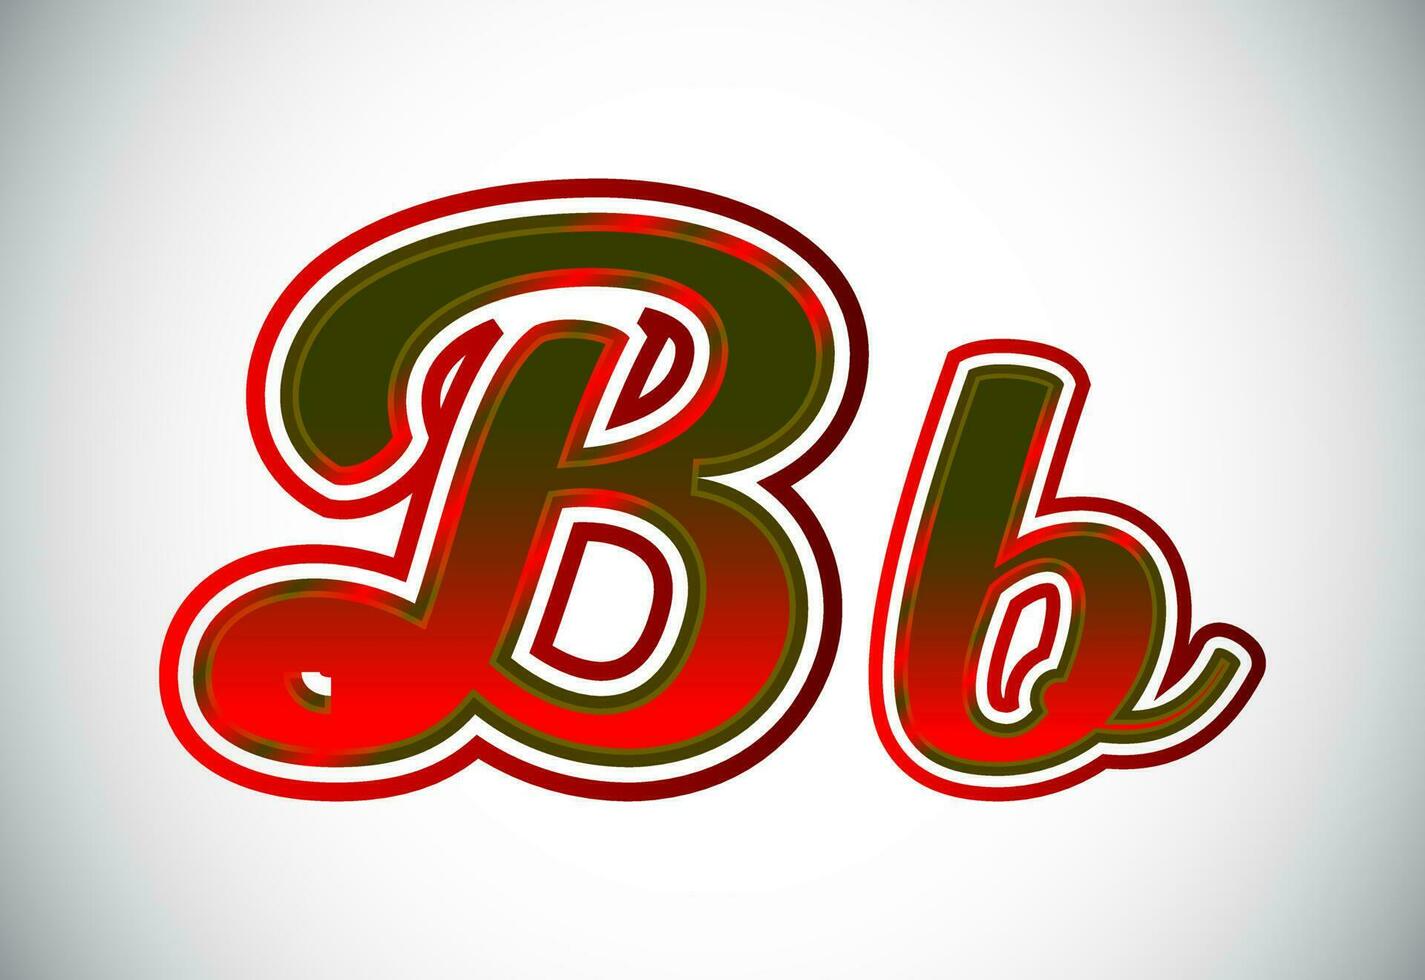 English Upper And Lower Case Letter B. Graphic Alphabet Symbol For Corporate Business Identity vector